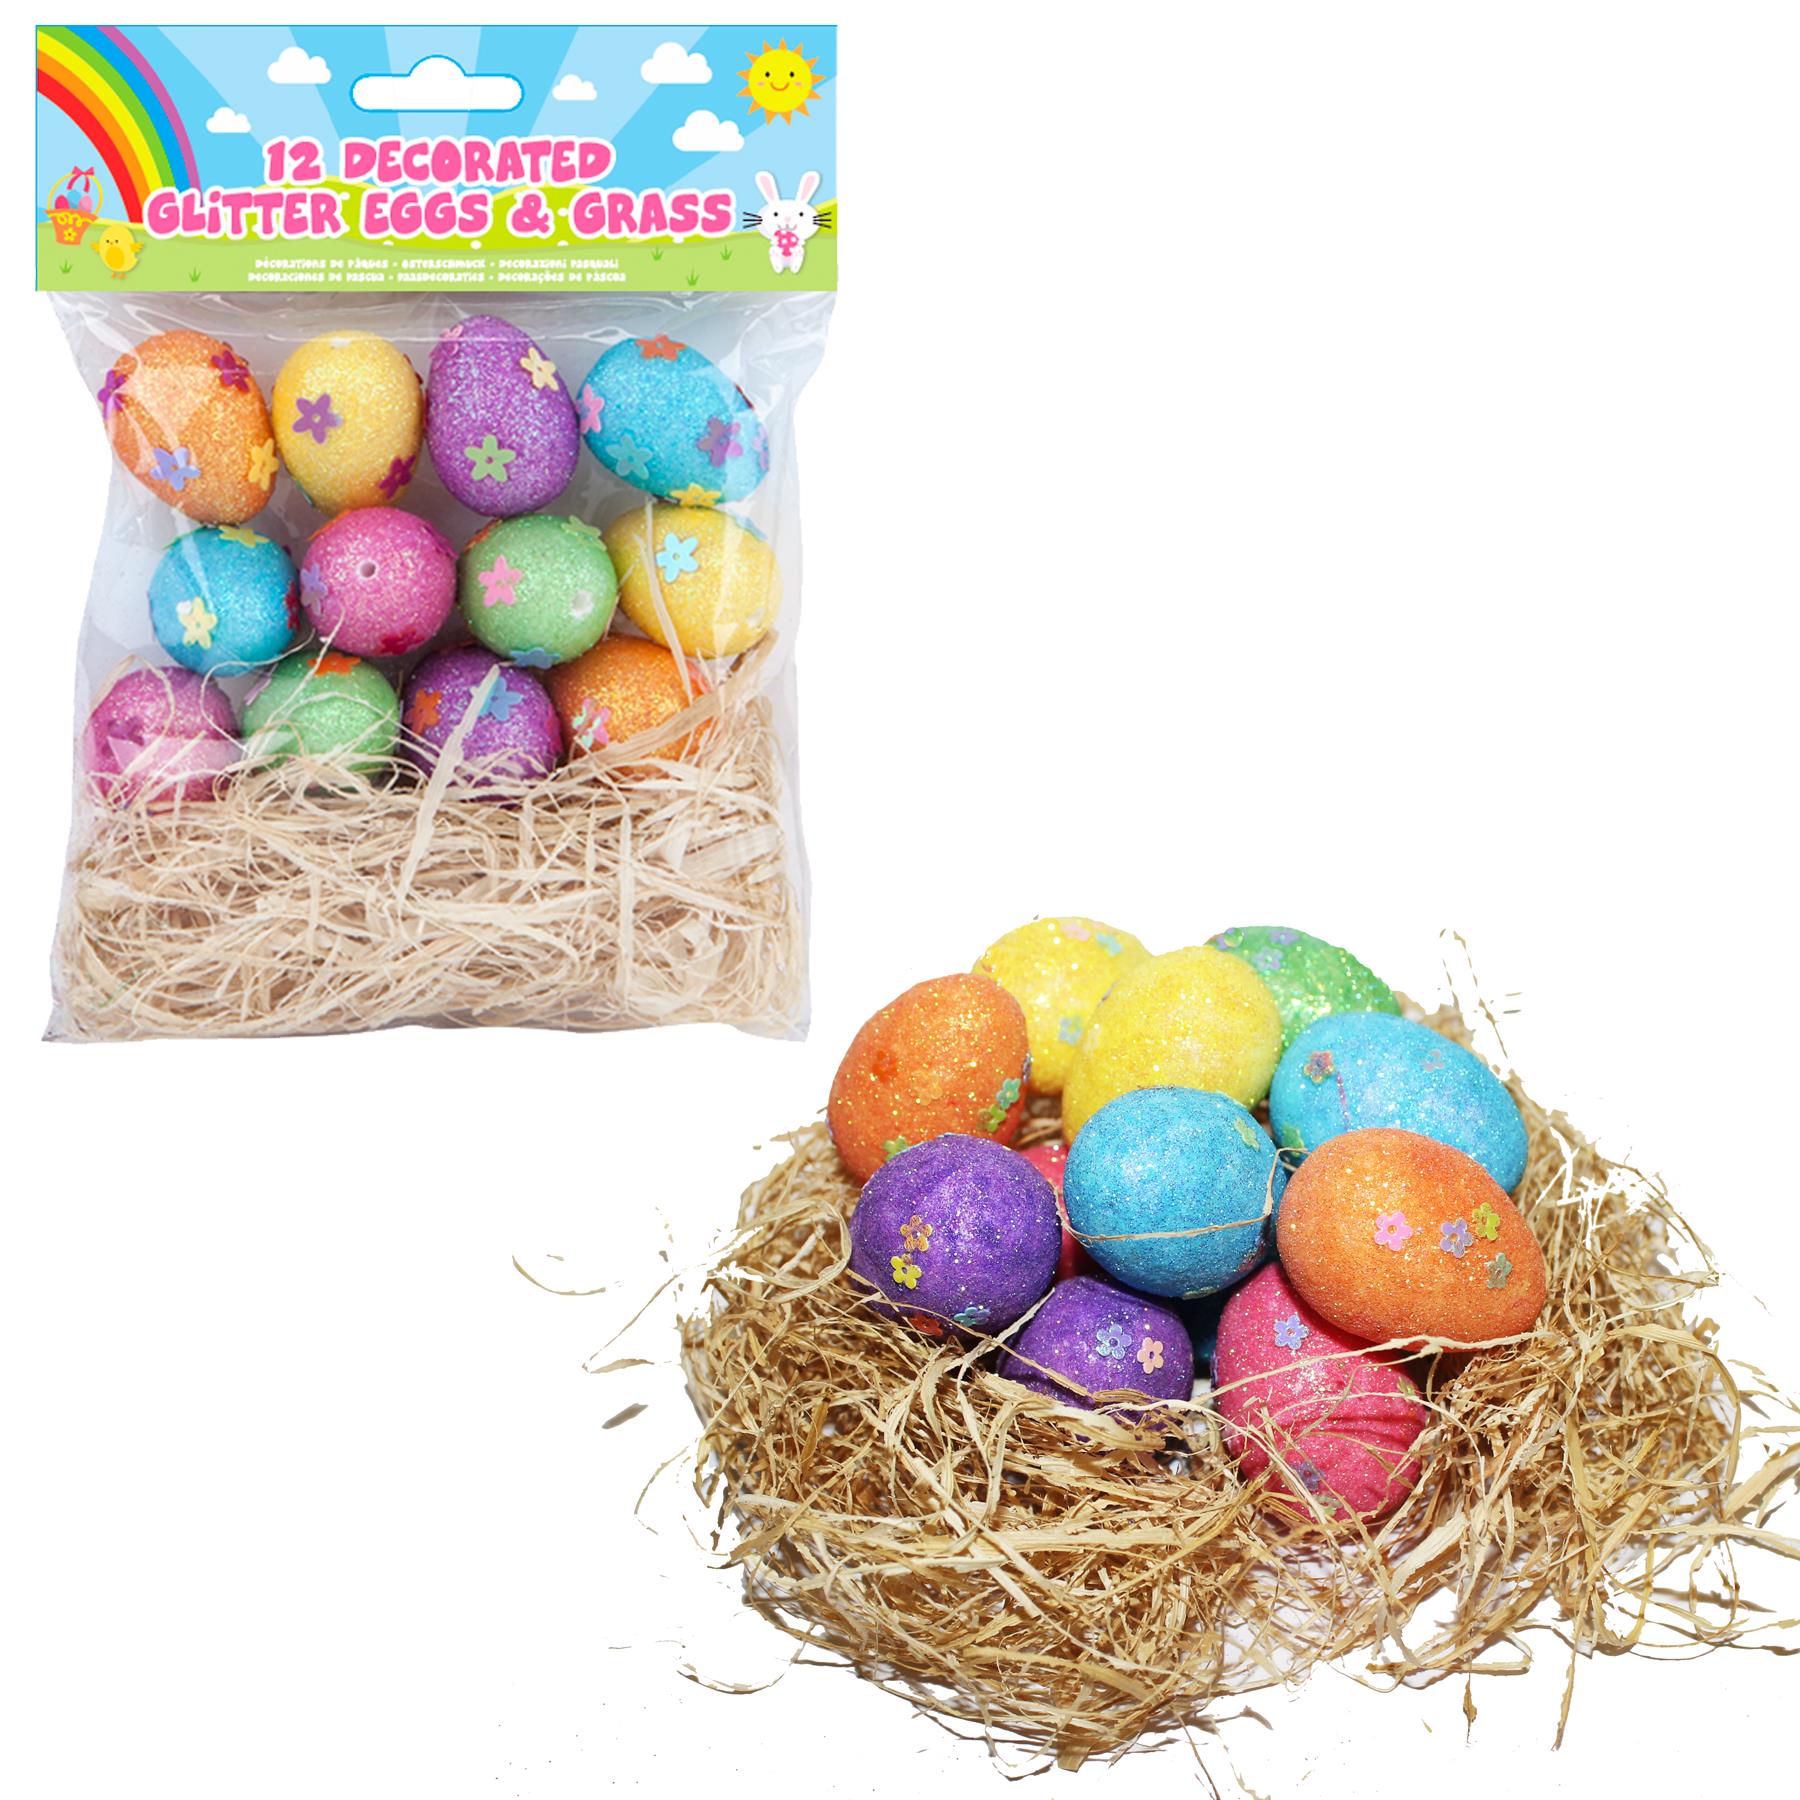 Easter Decorations, Bonnet Making, Arts and Crafts - 12 Glitter Eggs with Grass